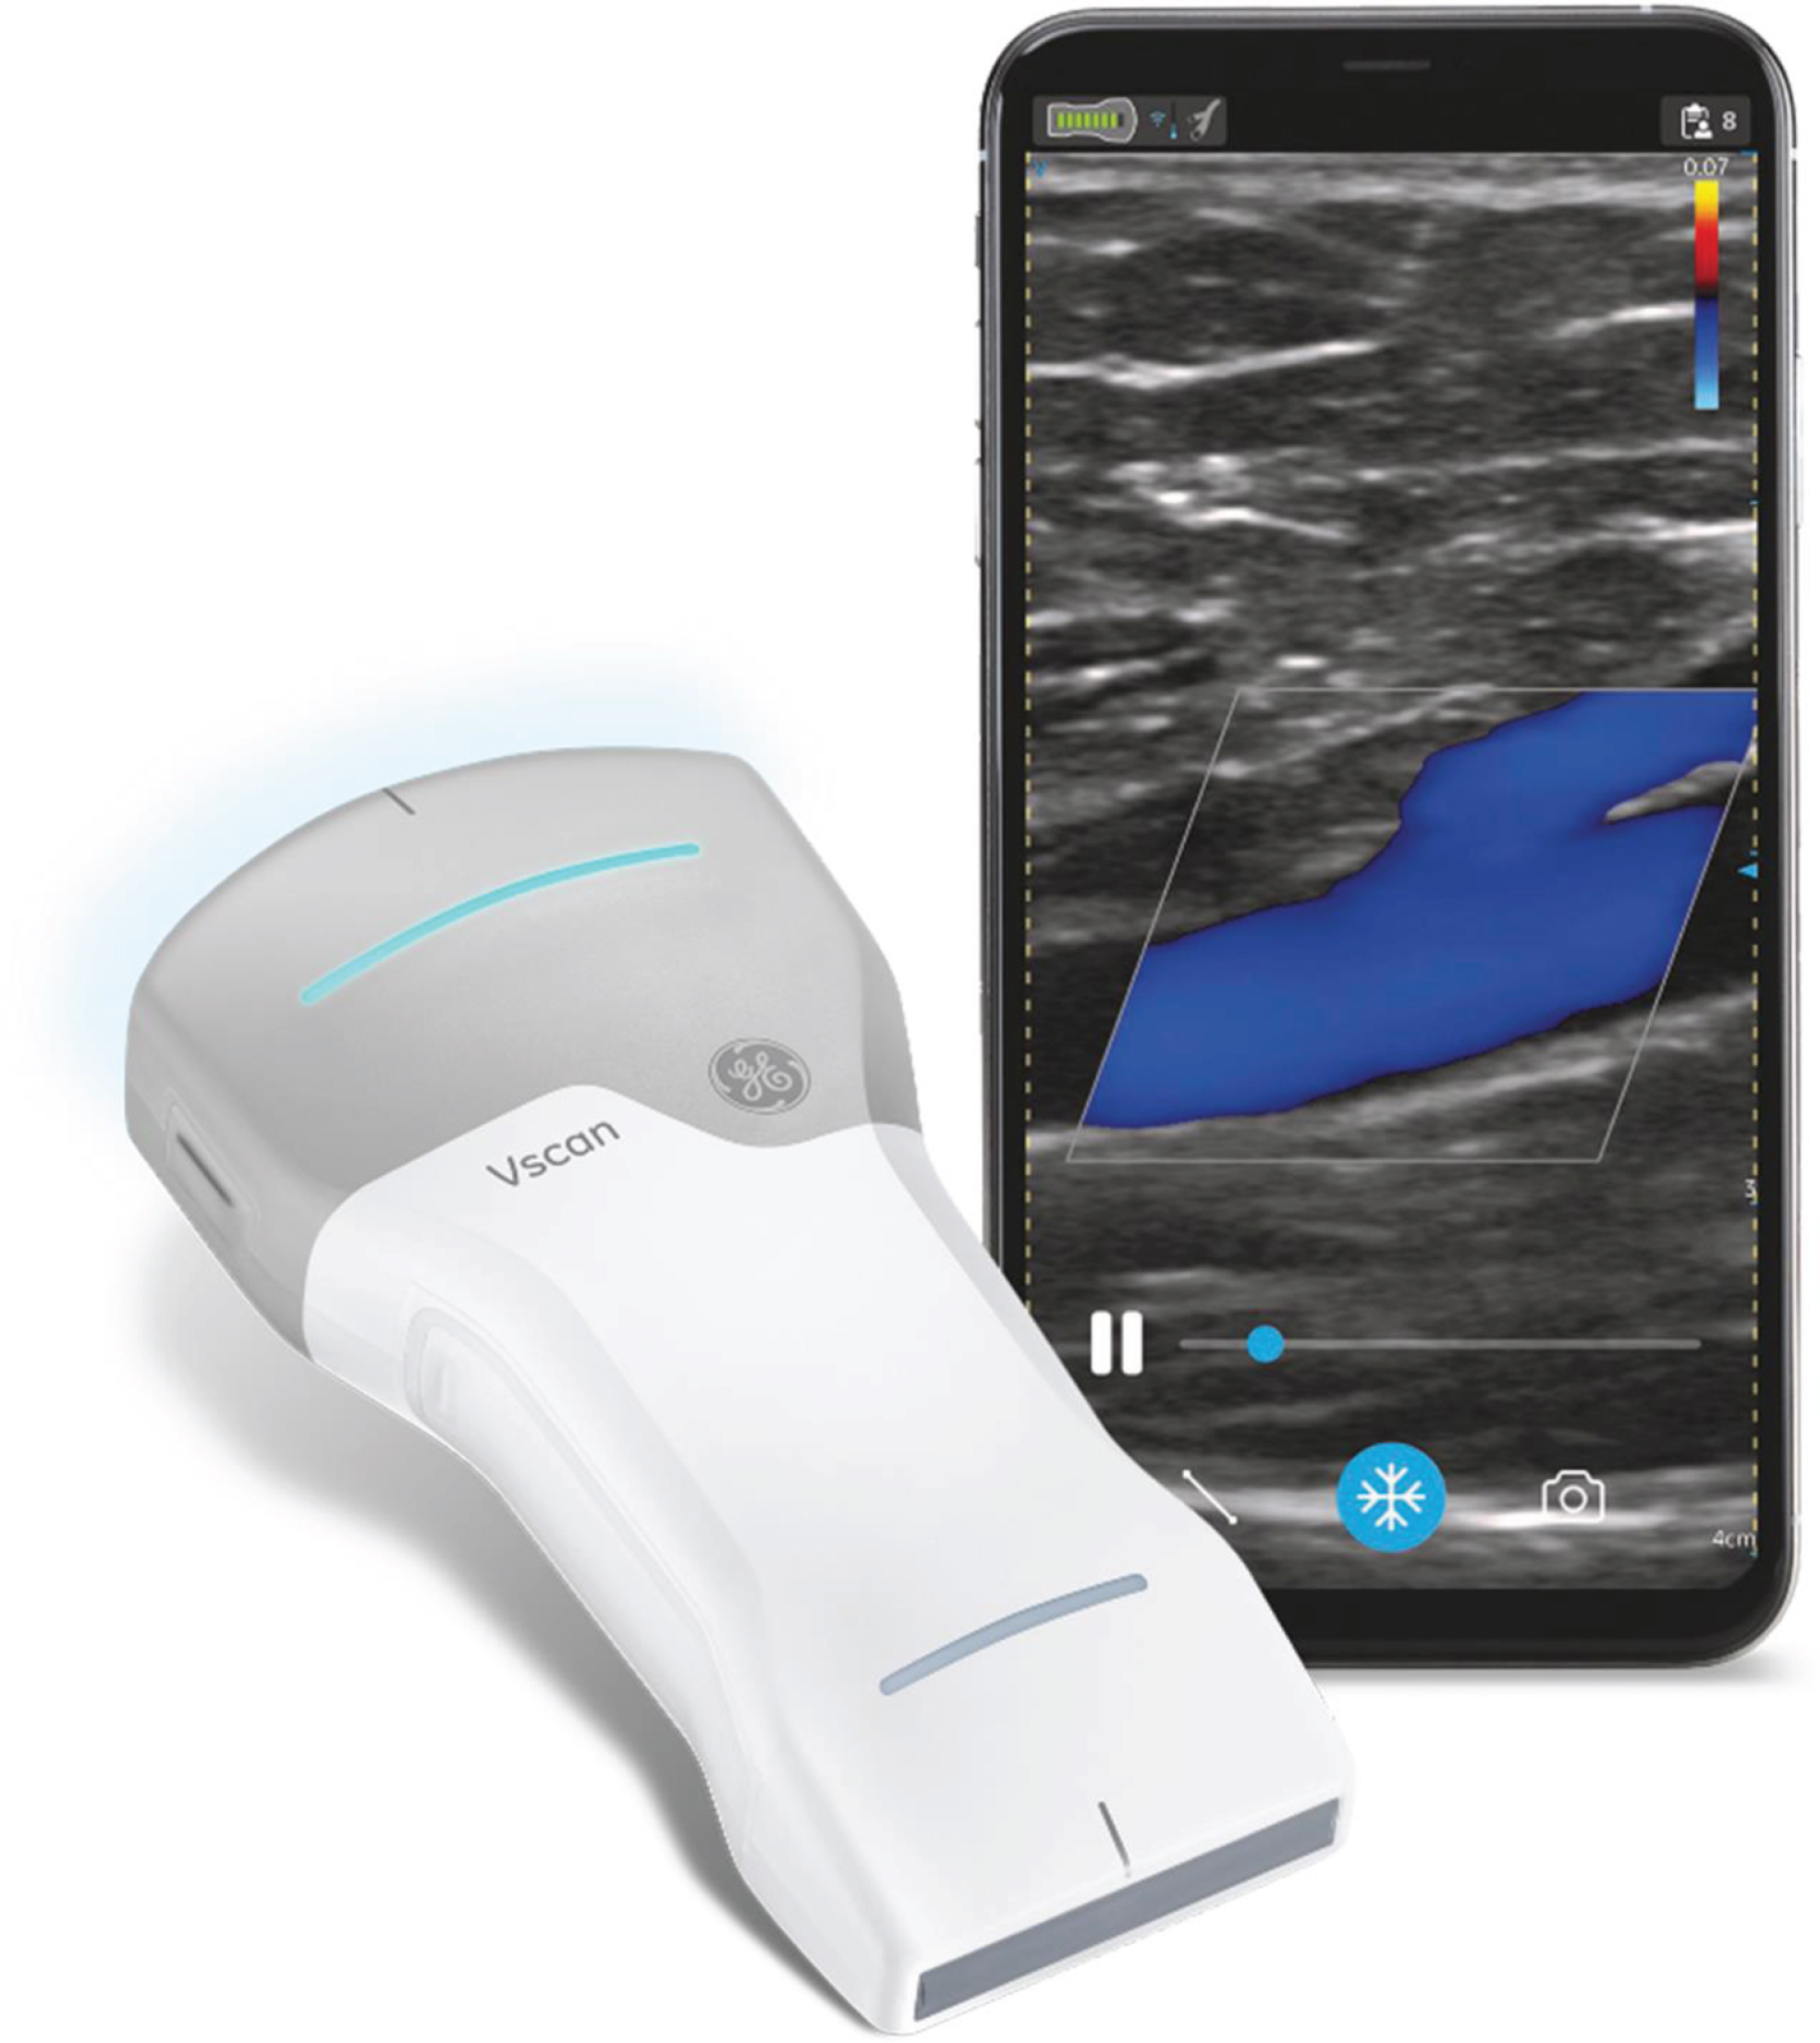 Image of the wireless point-of care ultrasound device (Vscan Air, GE Healthcare, USA) with kind permission of Mr Benjamin Preissler (GE Healthcare).